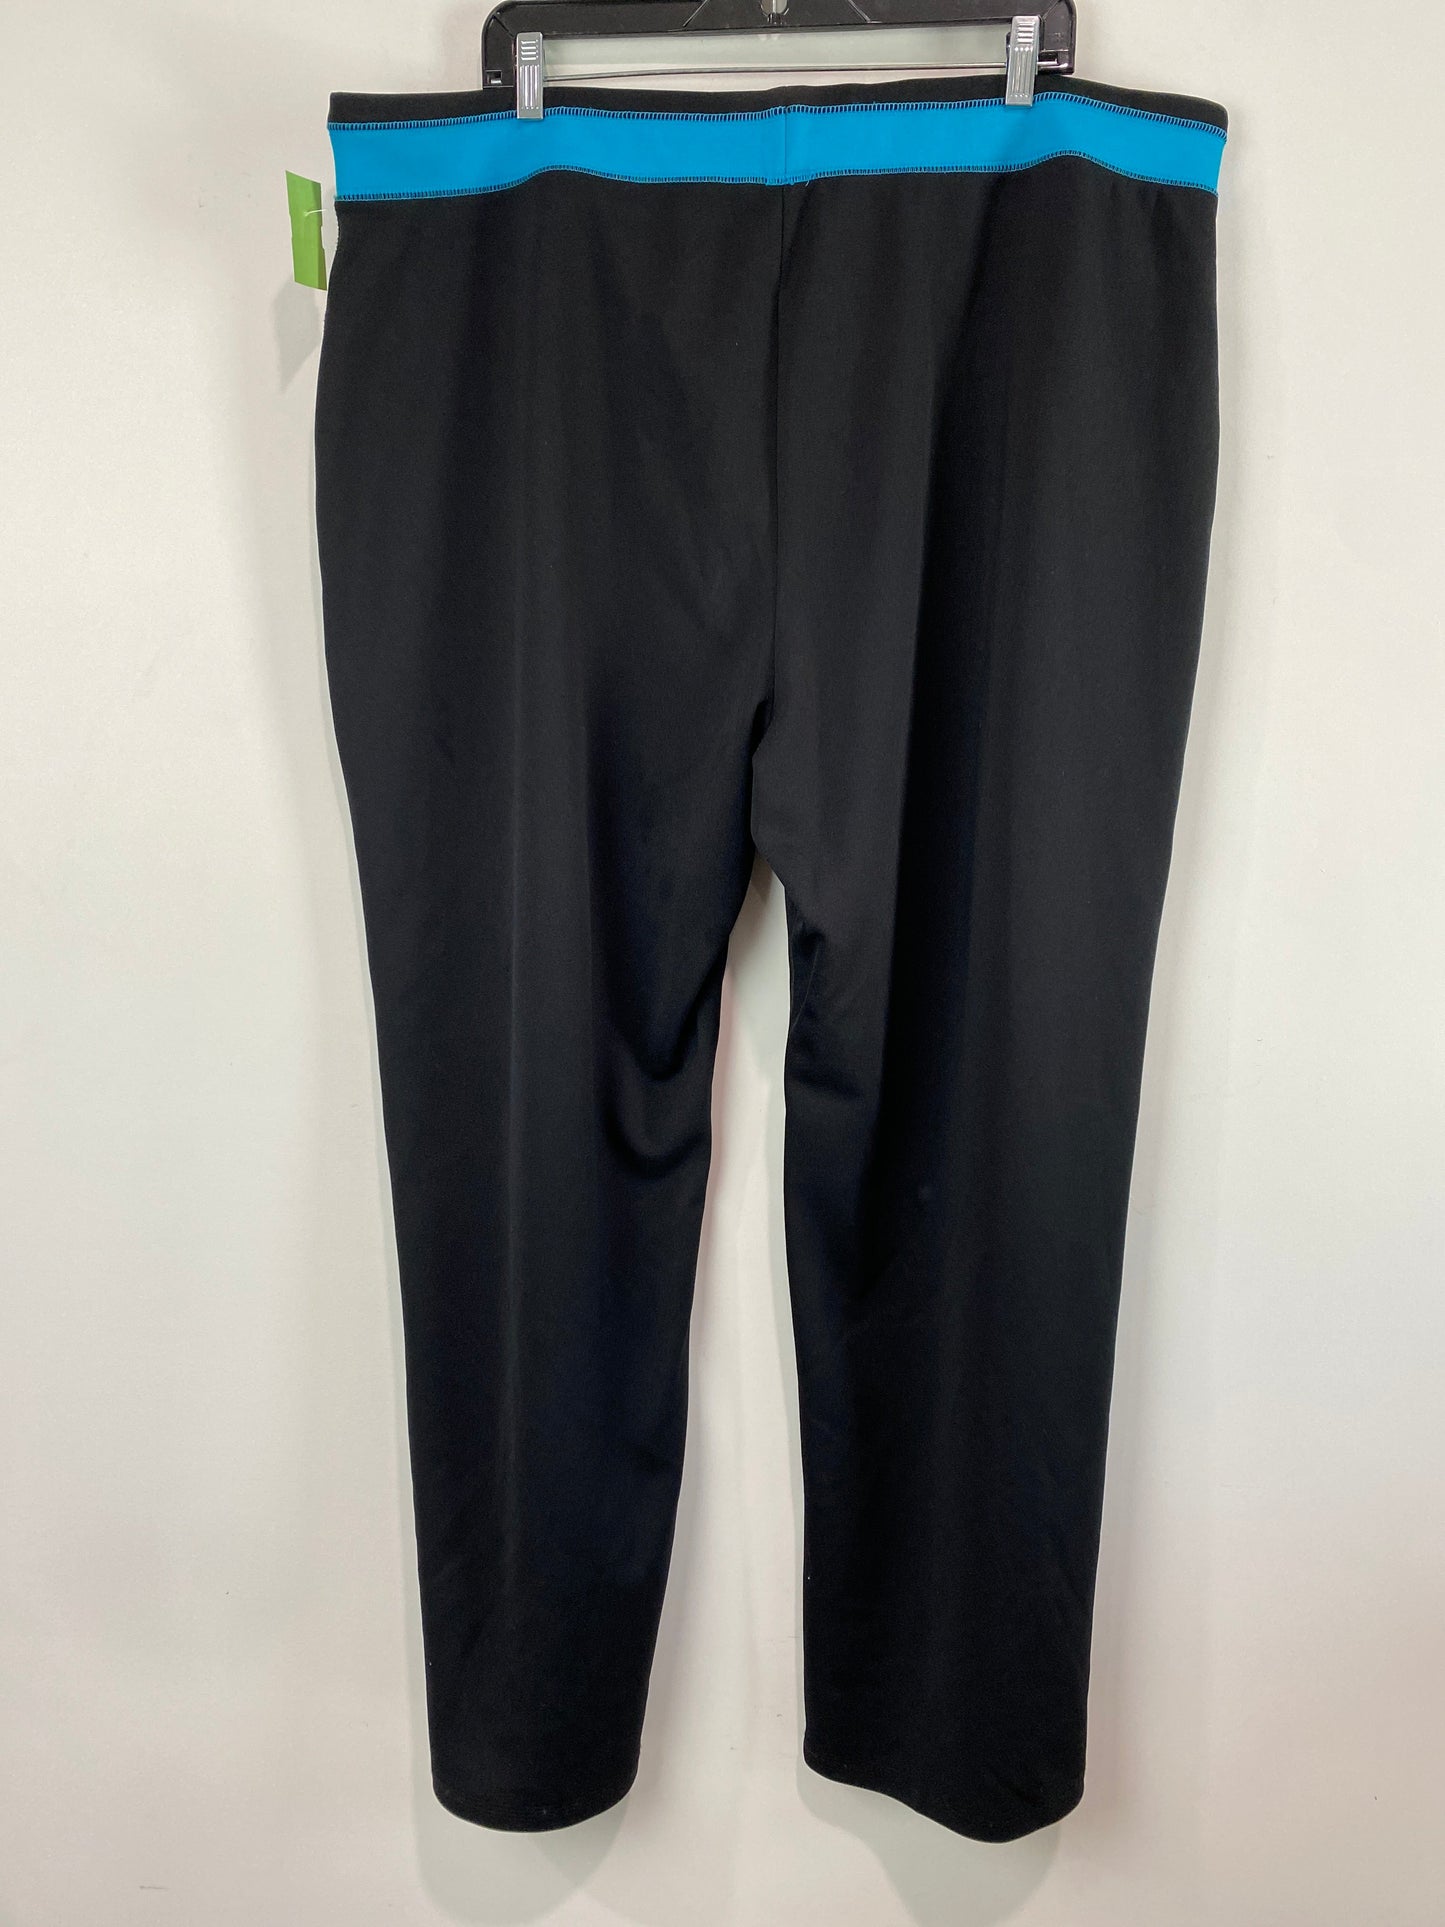 Athletic Pants 2pc By Be Inspired  Size: 3x